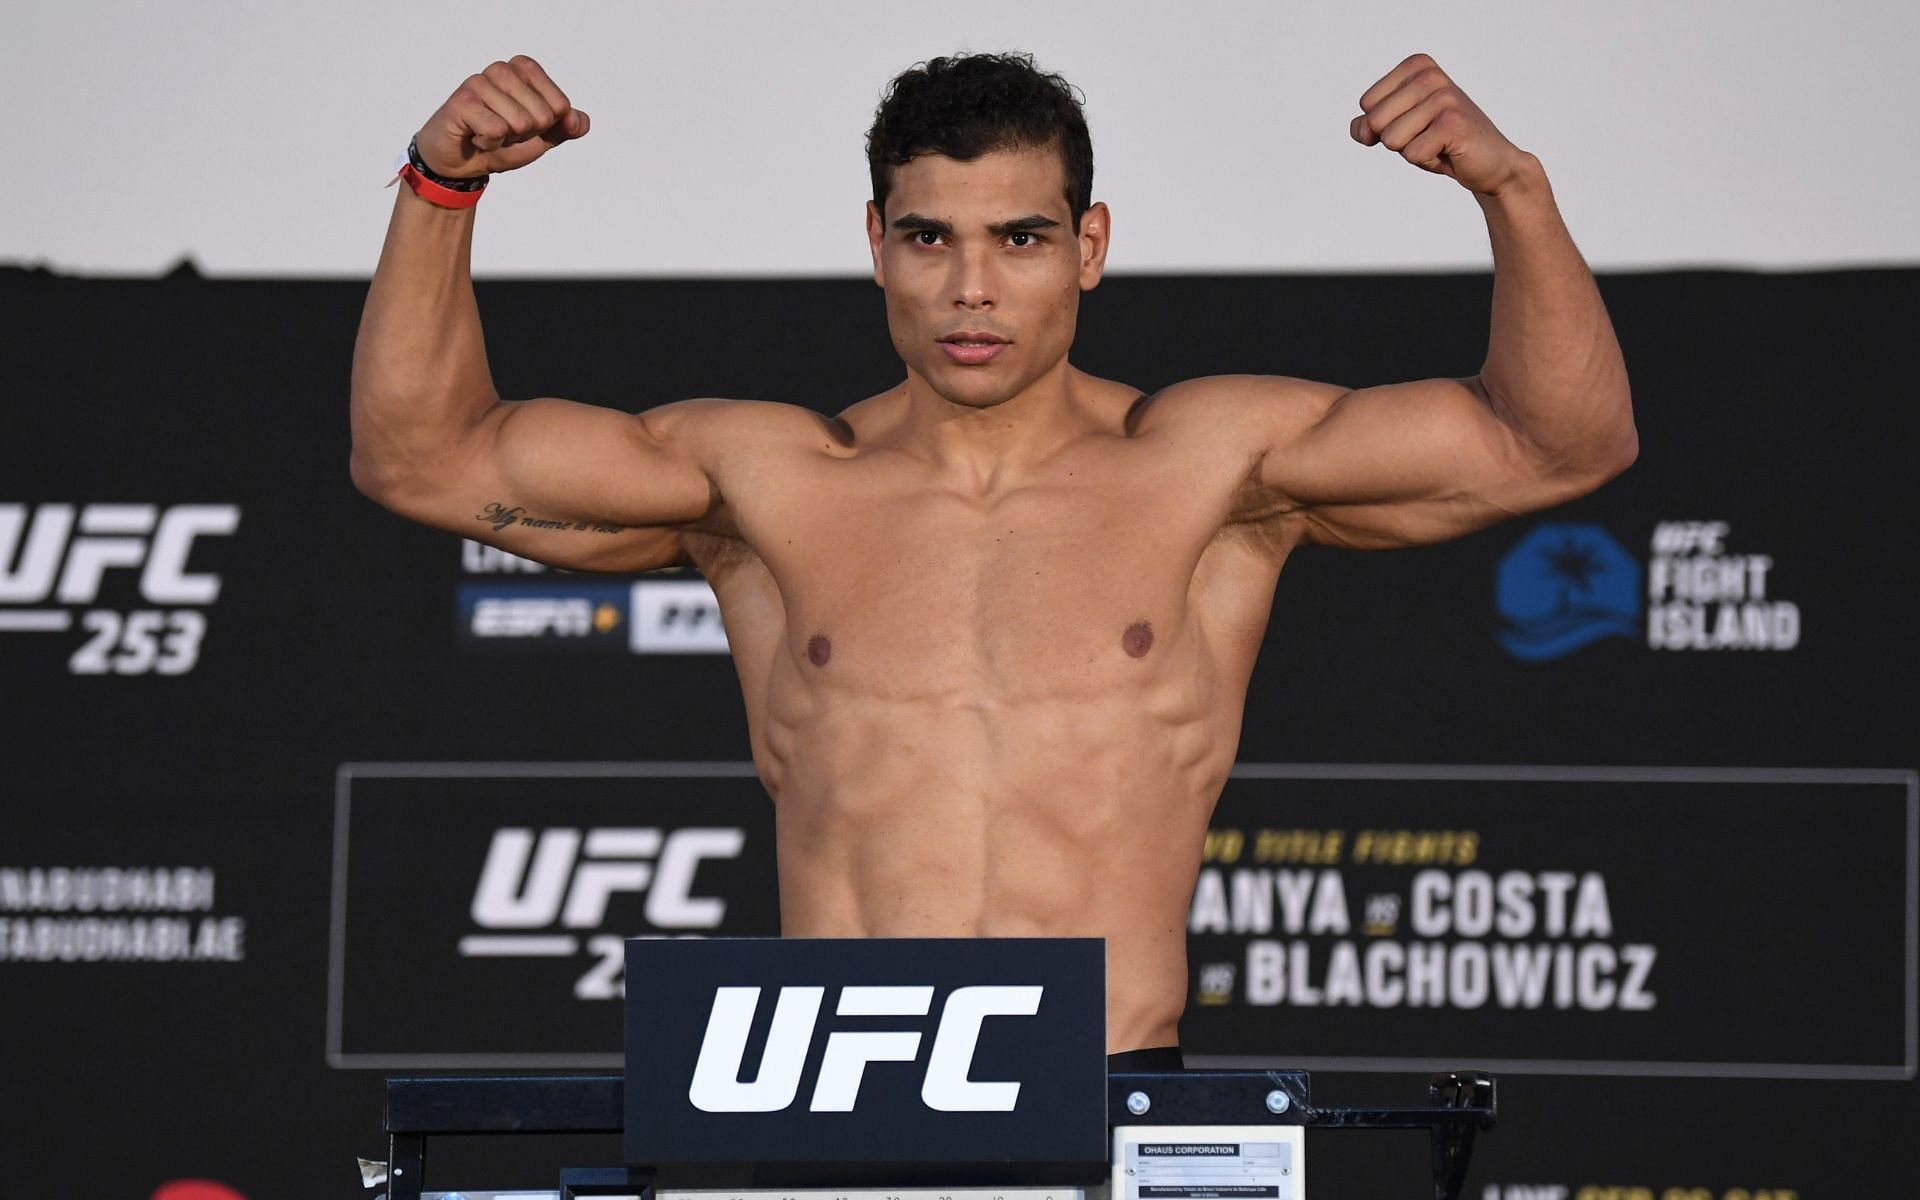 No.5 UFC middleweight contender Paulo Costa at the UFC 253 weigh in ceremony